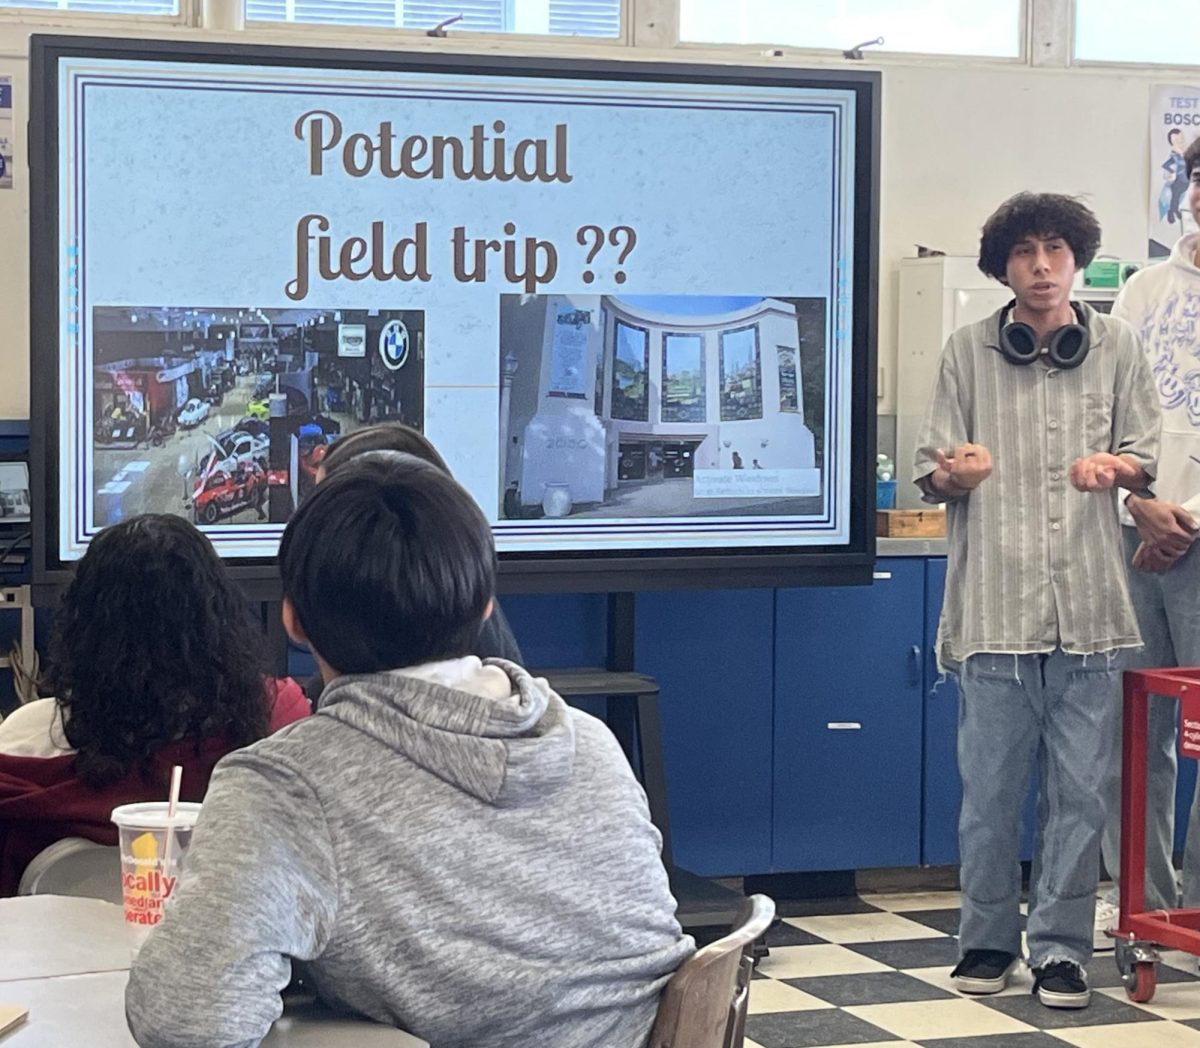 On Jan. 29, Bonita Vista High (BVH) Car Culture Club co-president and senior Haydn Lopez gives a slideshow presentation about Car Culture Club at the clubs first meeting during lunch at BVH autoshop. Lopez is informing the clubs members of a potential club field trip to the San Diego Automotive Museum. This topic was among other informational slides about the Car Culture Clubs plans for this year, such as participating in BVHs food fair to raise money.